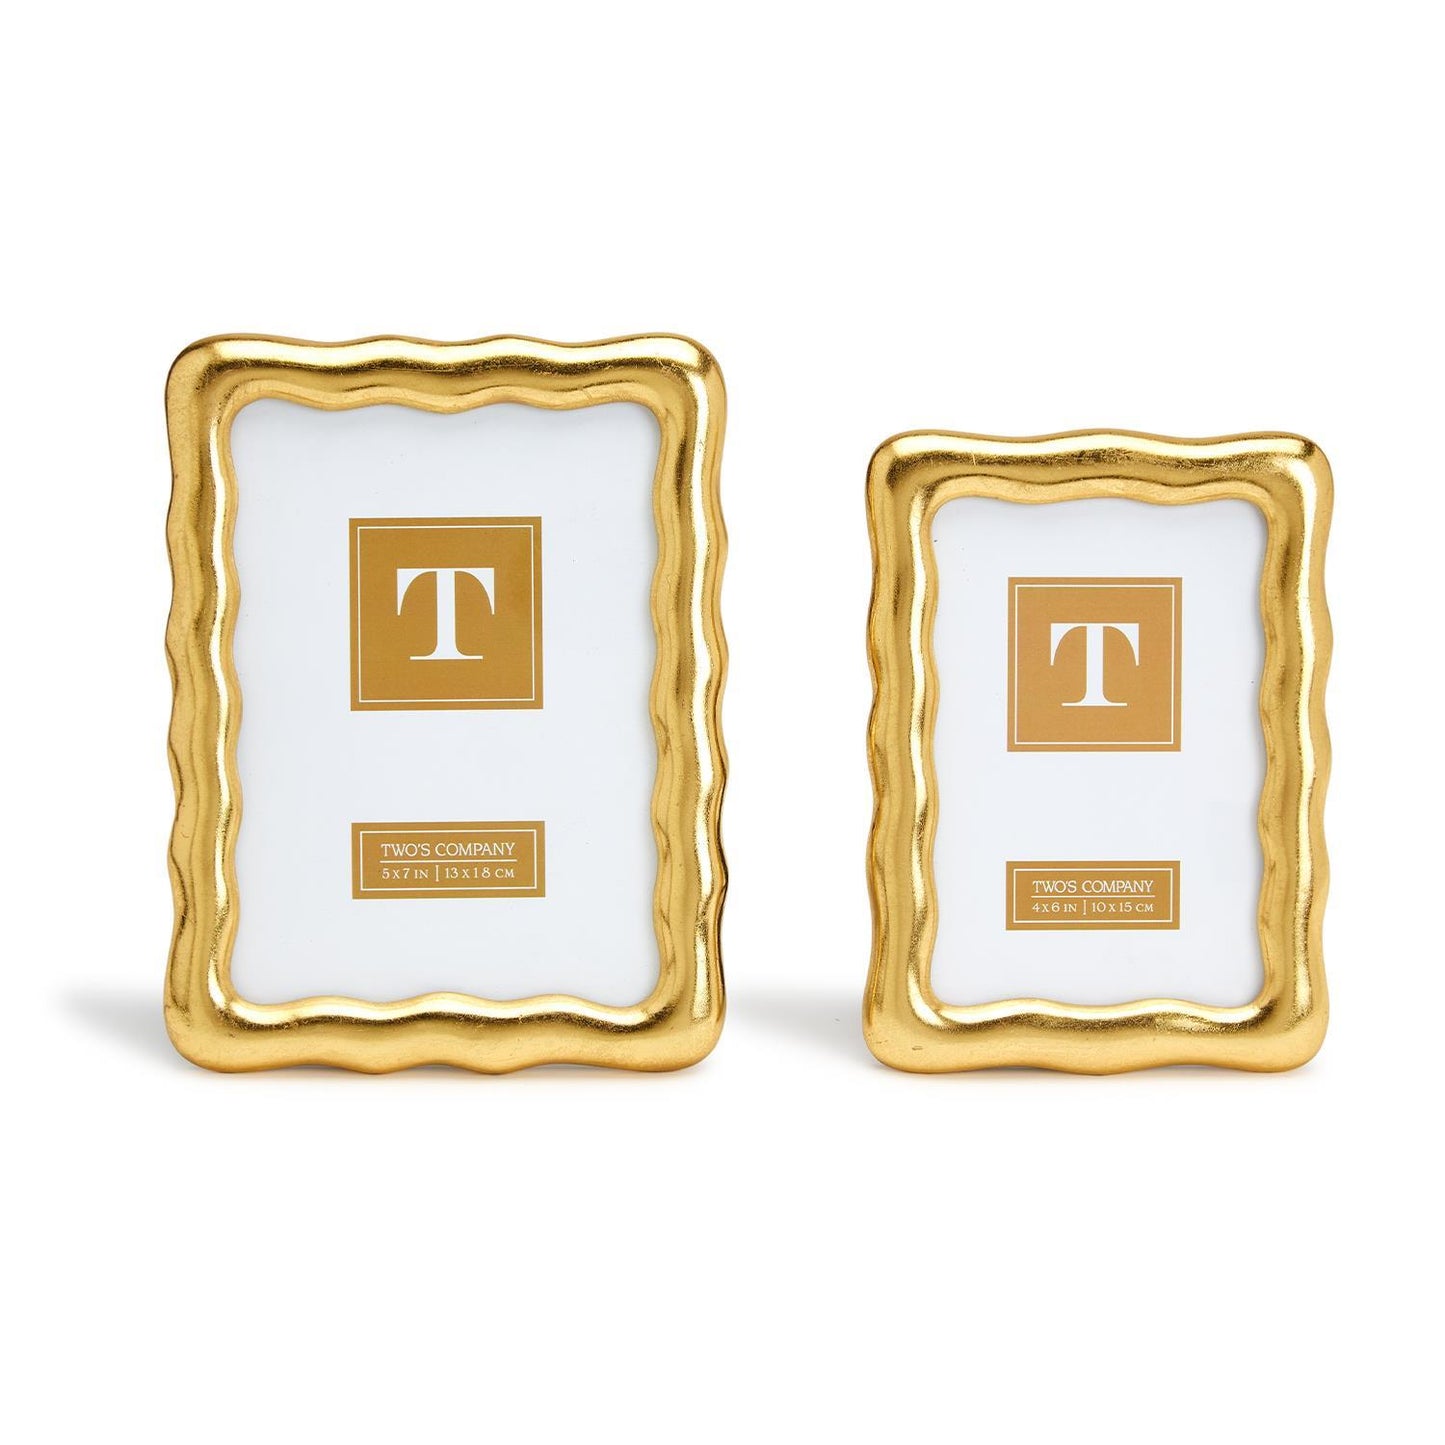 Two's Company Golden Ore Set of 2 Photo Frame in 2 Sizes: 4" X 6" & 5" X 7".